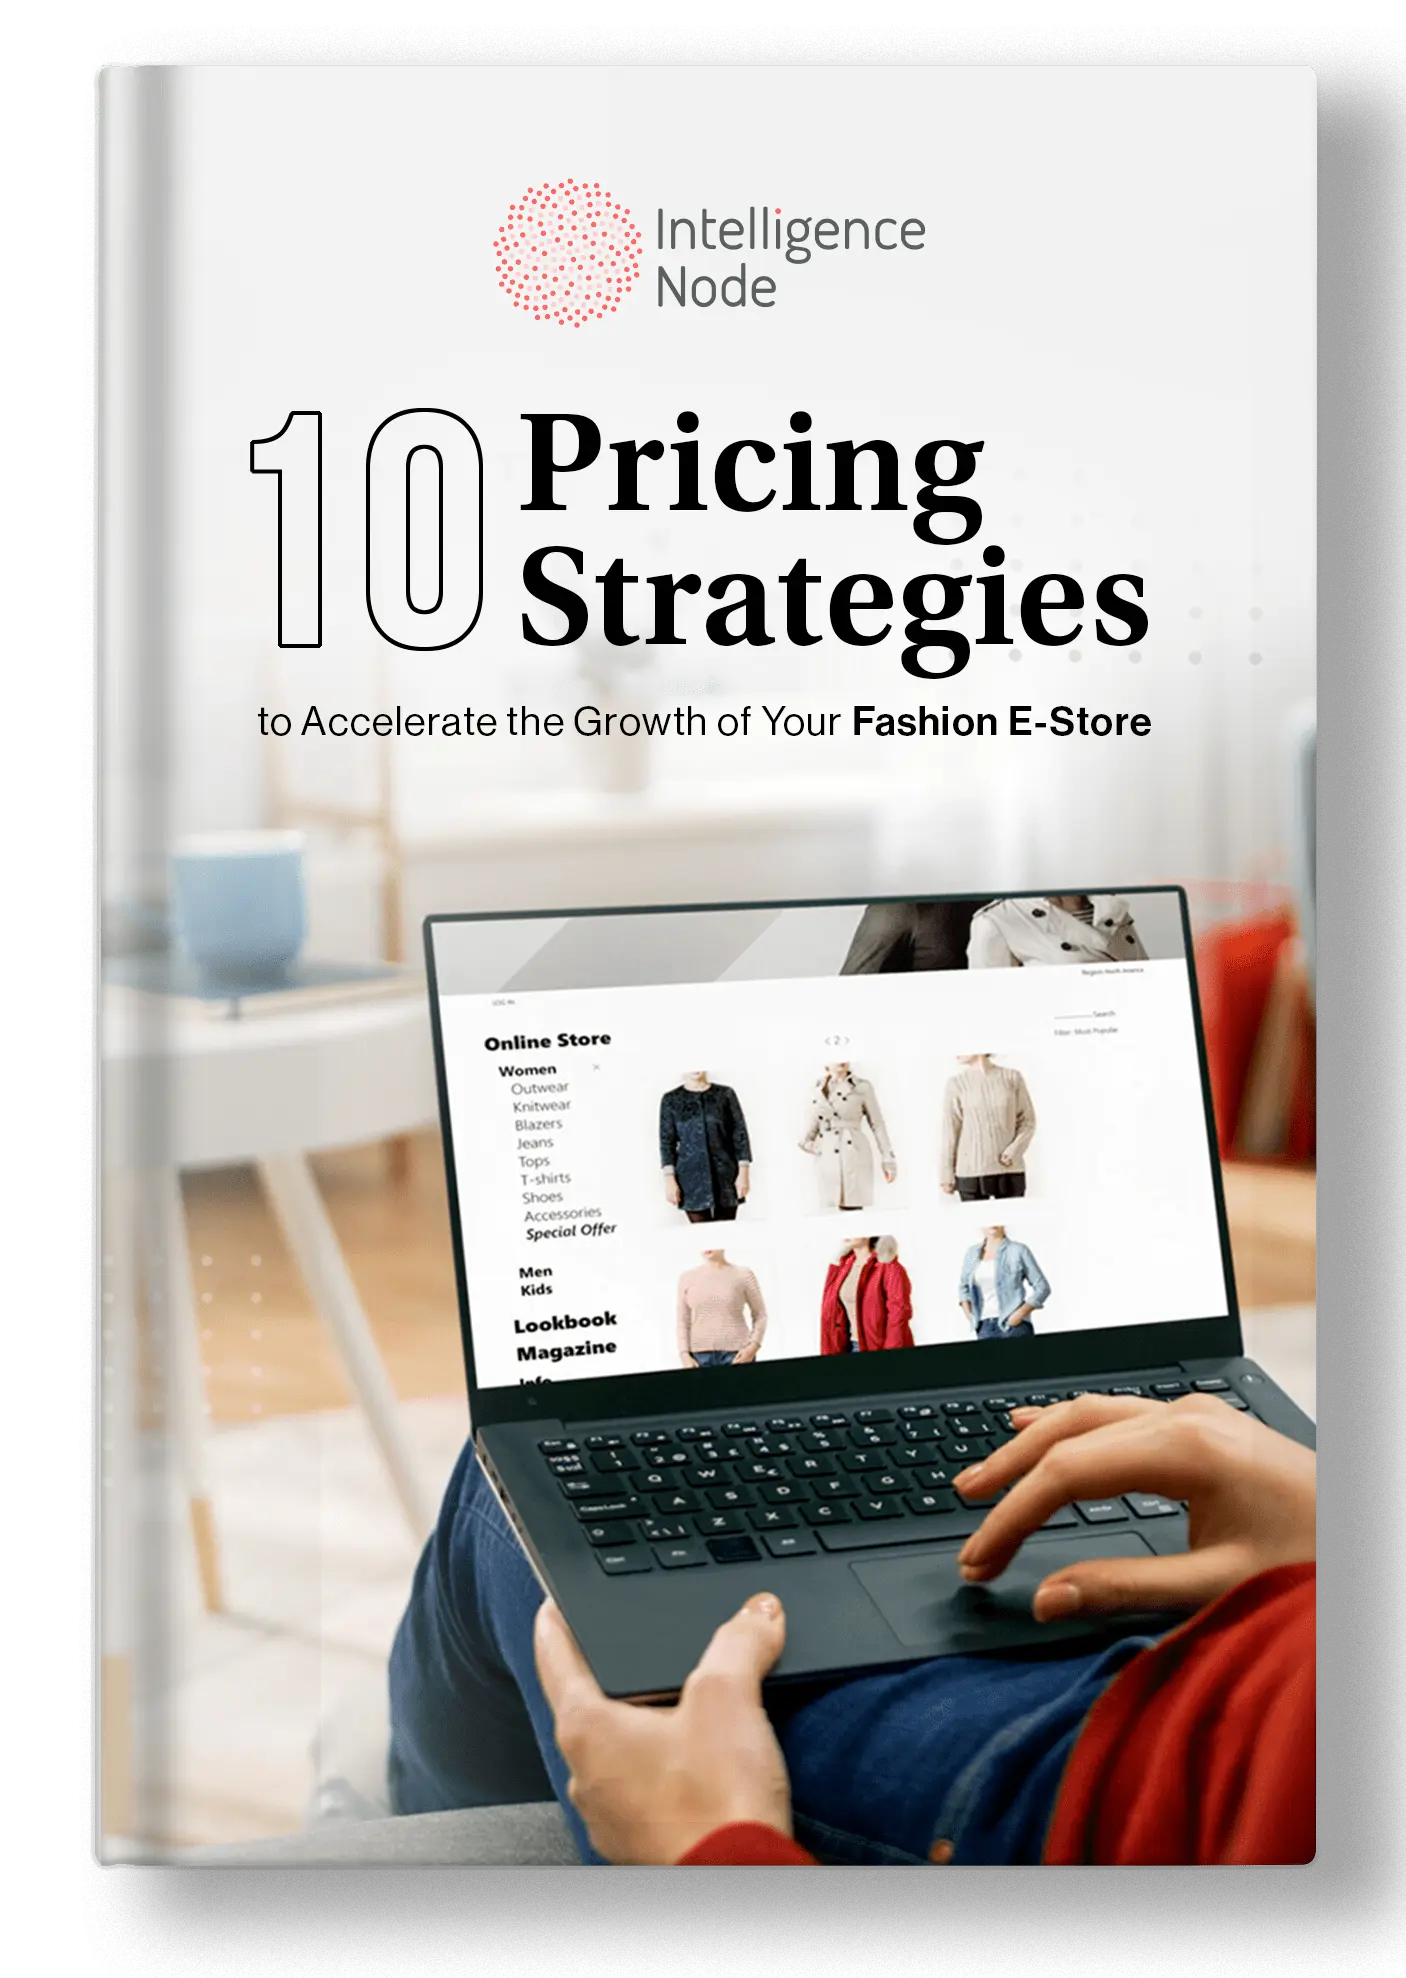 10 Pricing Strategies to Accelerate the Growth of Your Fashion E-Store - CV PNG copy-min